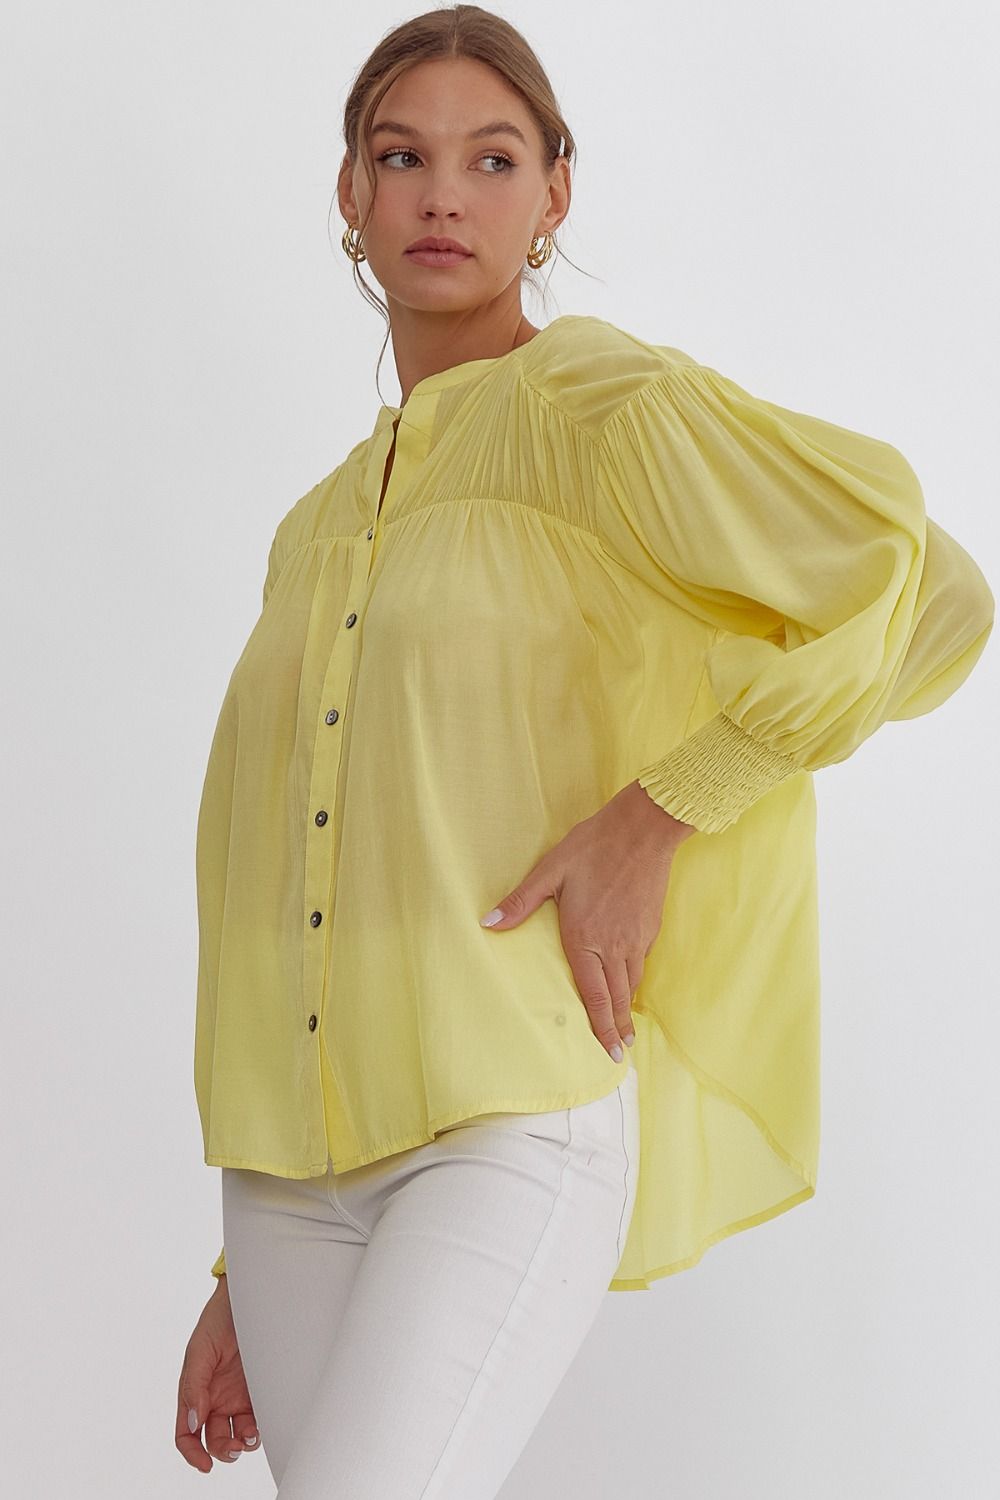 ENTRO INC Women's Top LEMONADE / S V-Neck Button Up Ls Crinkle Sleeve Top || David's Clothing T21942